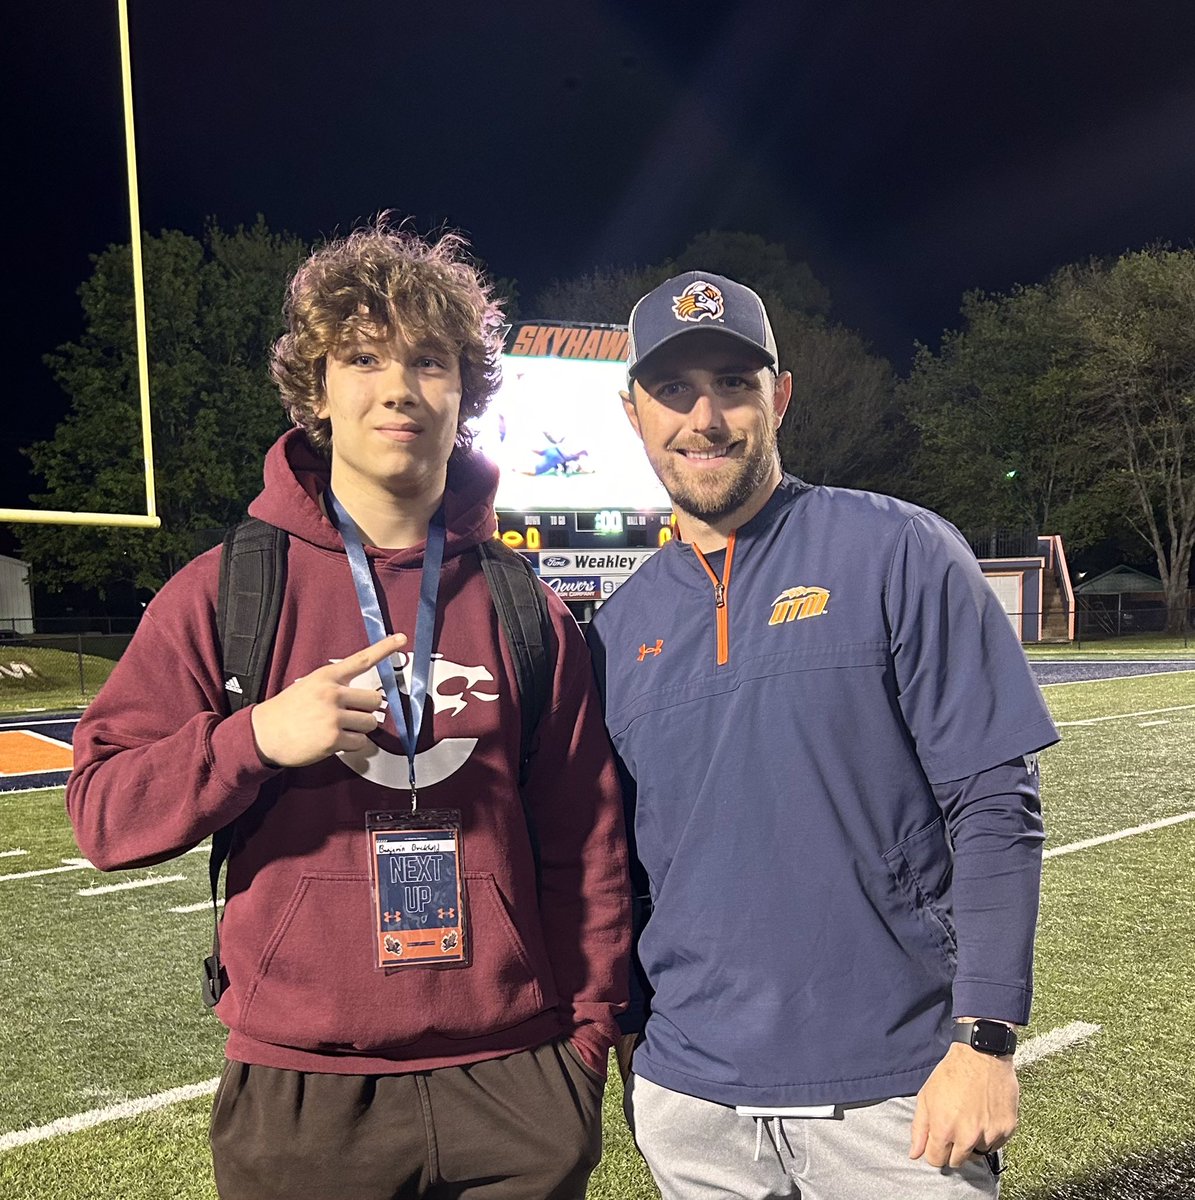 Had A Great Time At UT Martin And Watching The Spring Game! 🙏 @Coach_JSimpson @CoachAClifton @Coach_Butch_UTM @CHSDragonFB @CoachJoeRocconi @NickMarchy @CSmithScout @CoachHerb1 @johnvarlas @UTM_FOOTBALL